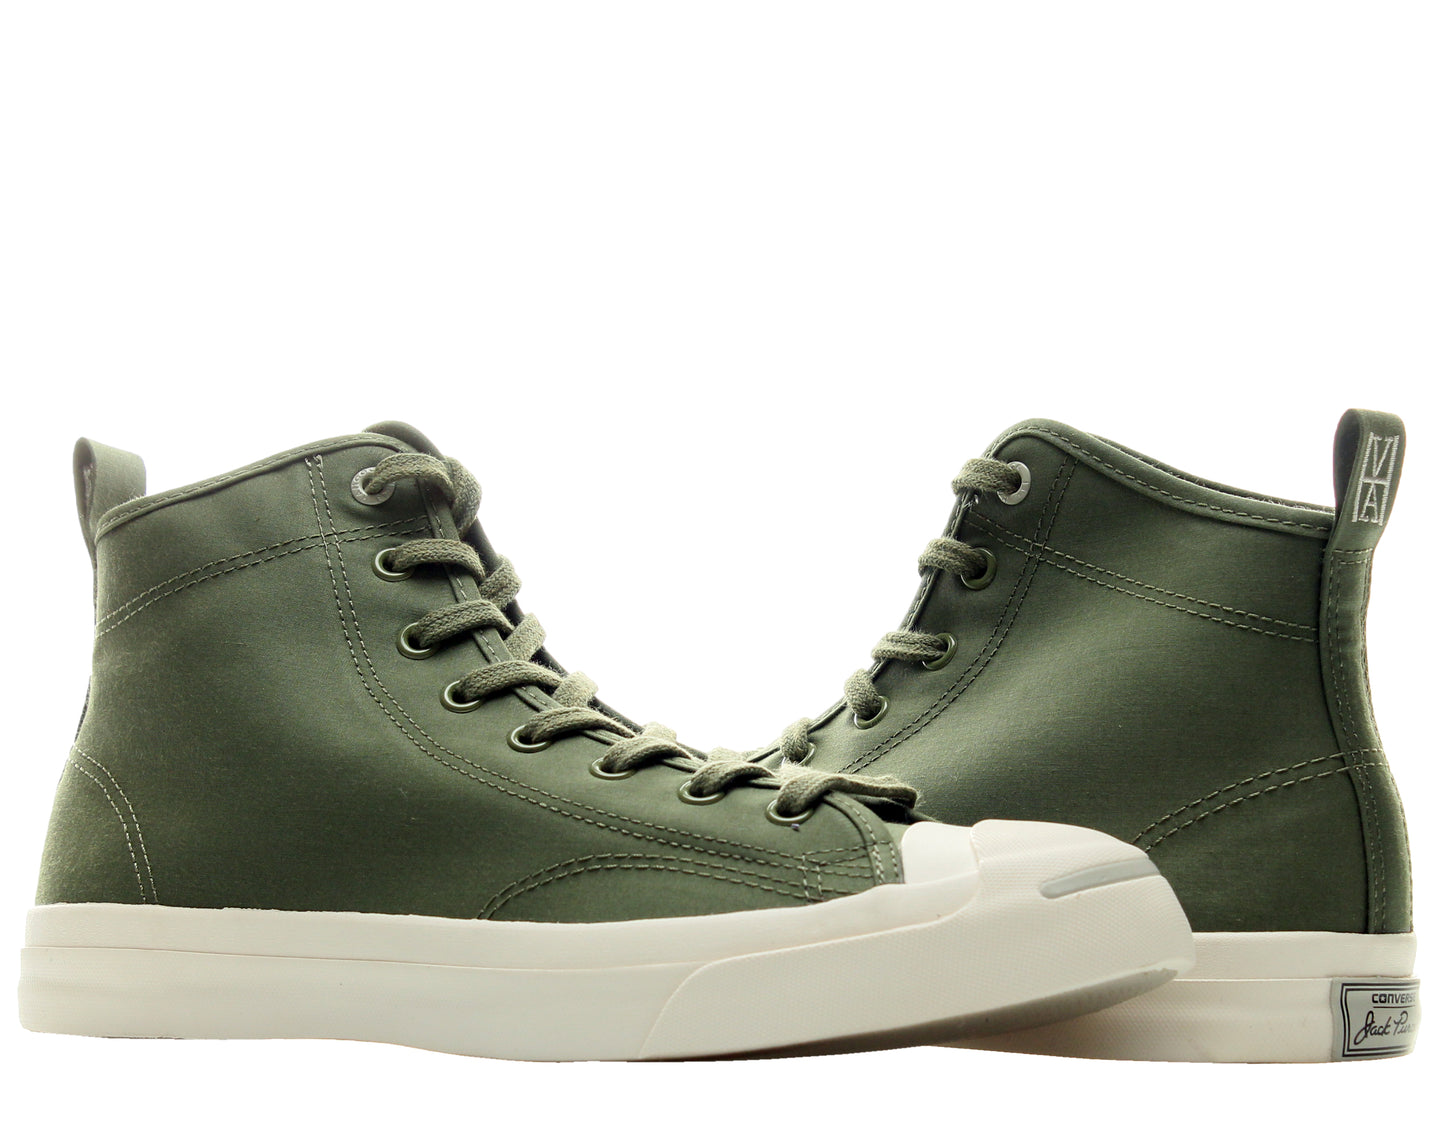 Converse Jack Purcell x Hancock Military Mid Top Sneakers